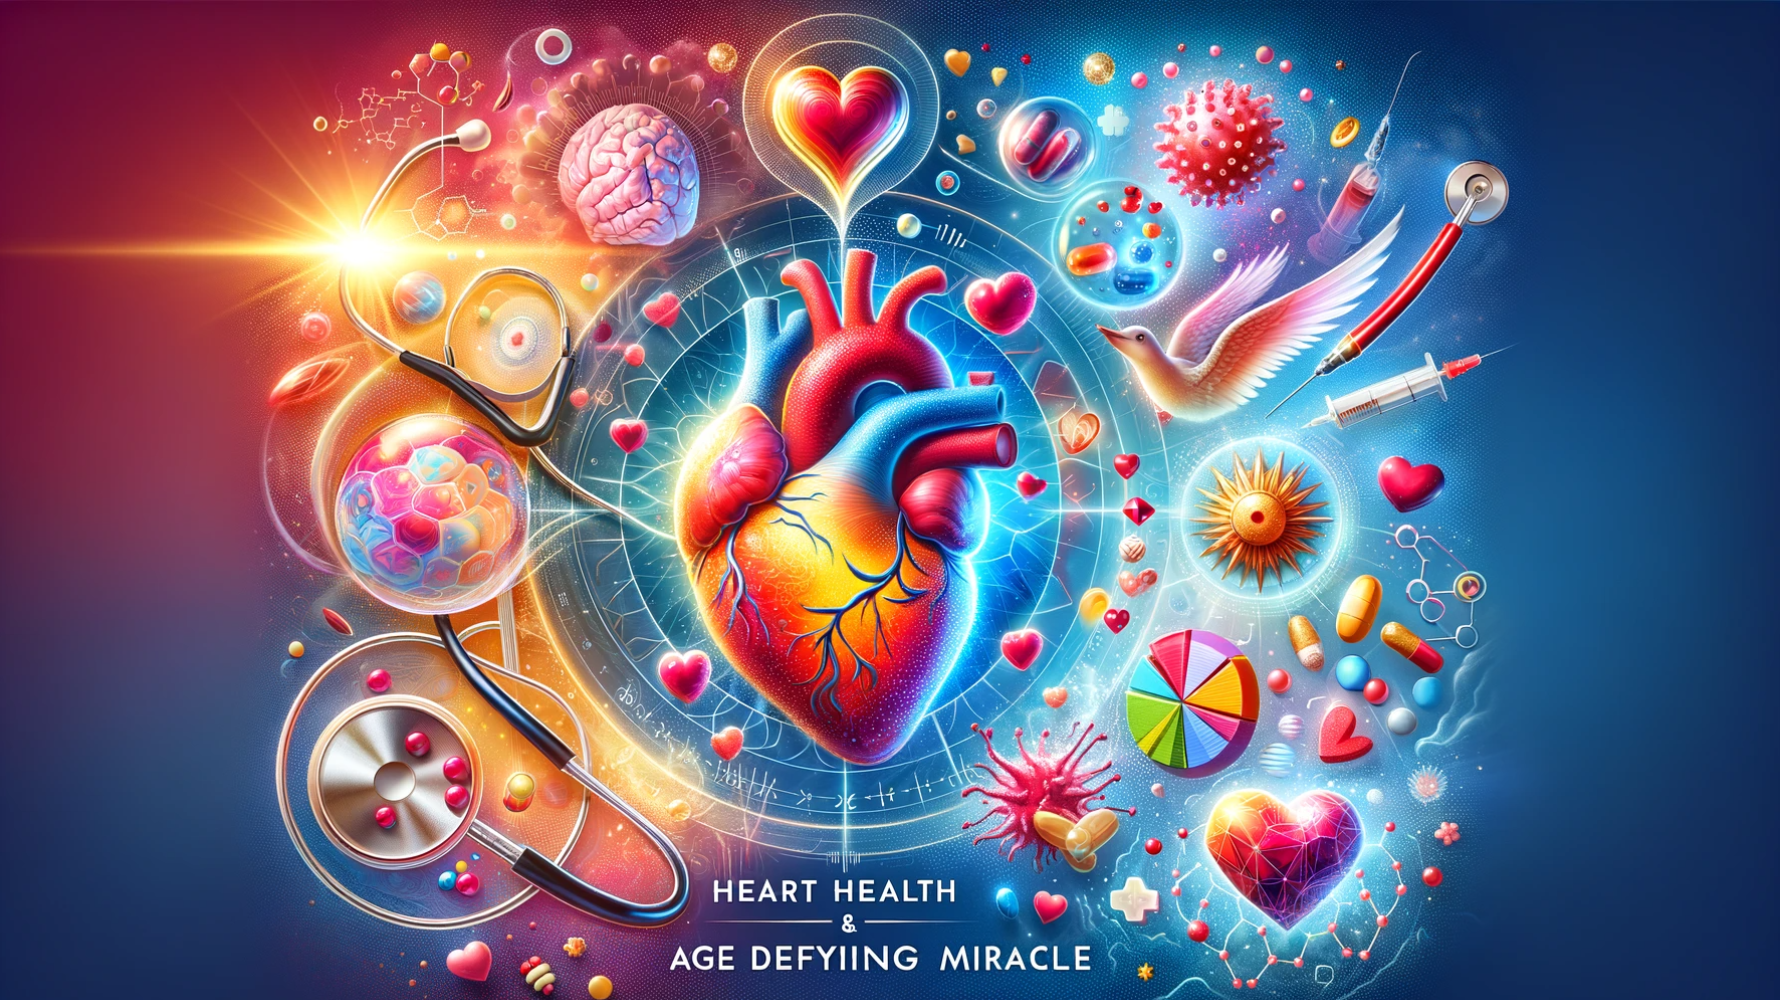 CoQ10: Heart Health & Age Defying Miracle